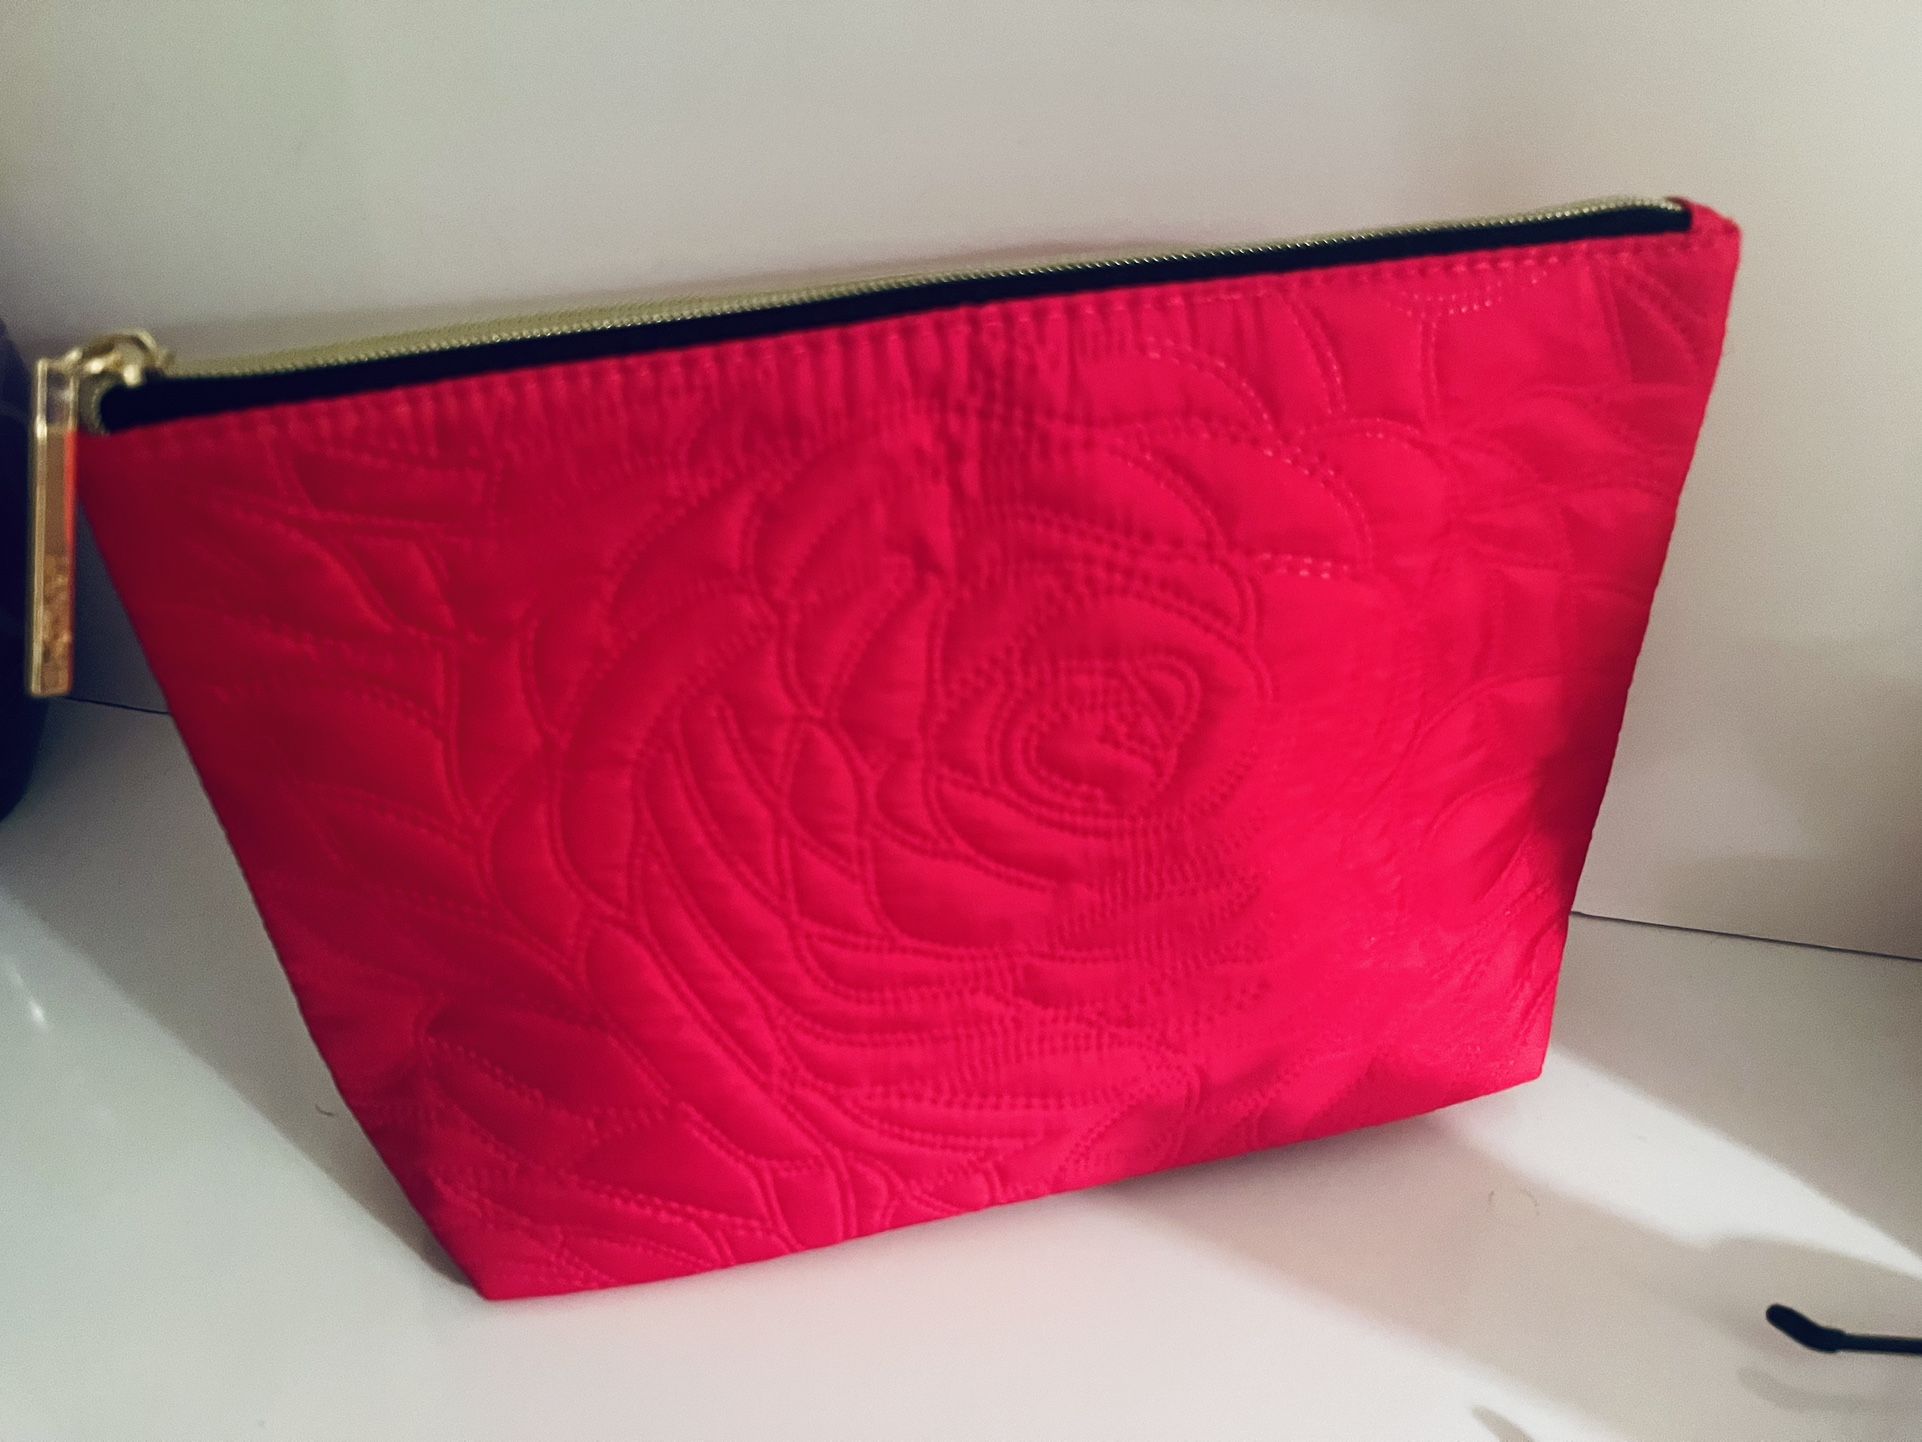 Lancôme Large Cosmetic bag. New. 9” X 6” comes from a smoke free environment.  